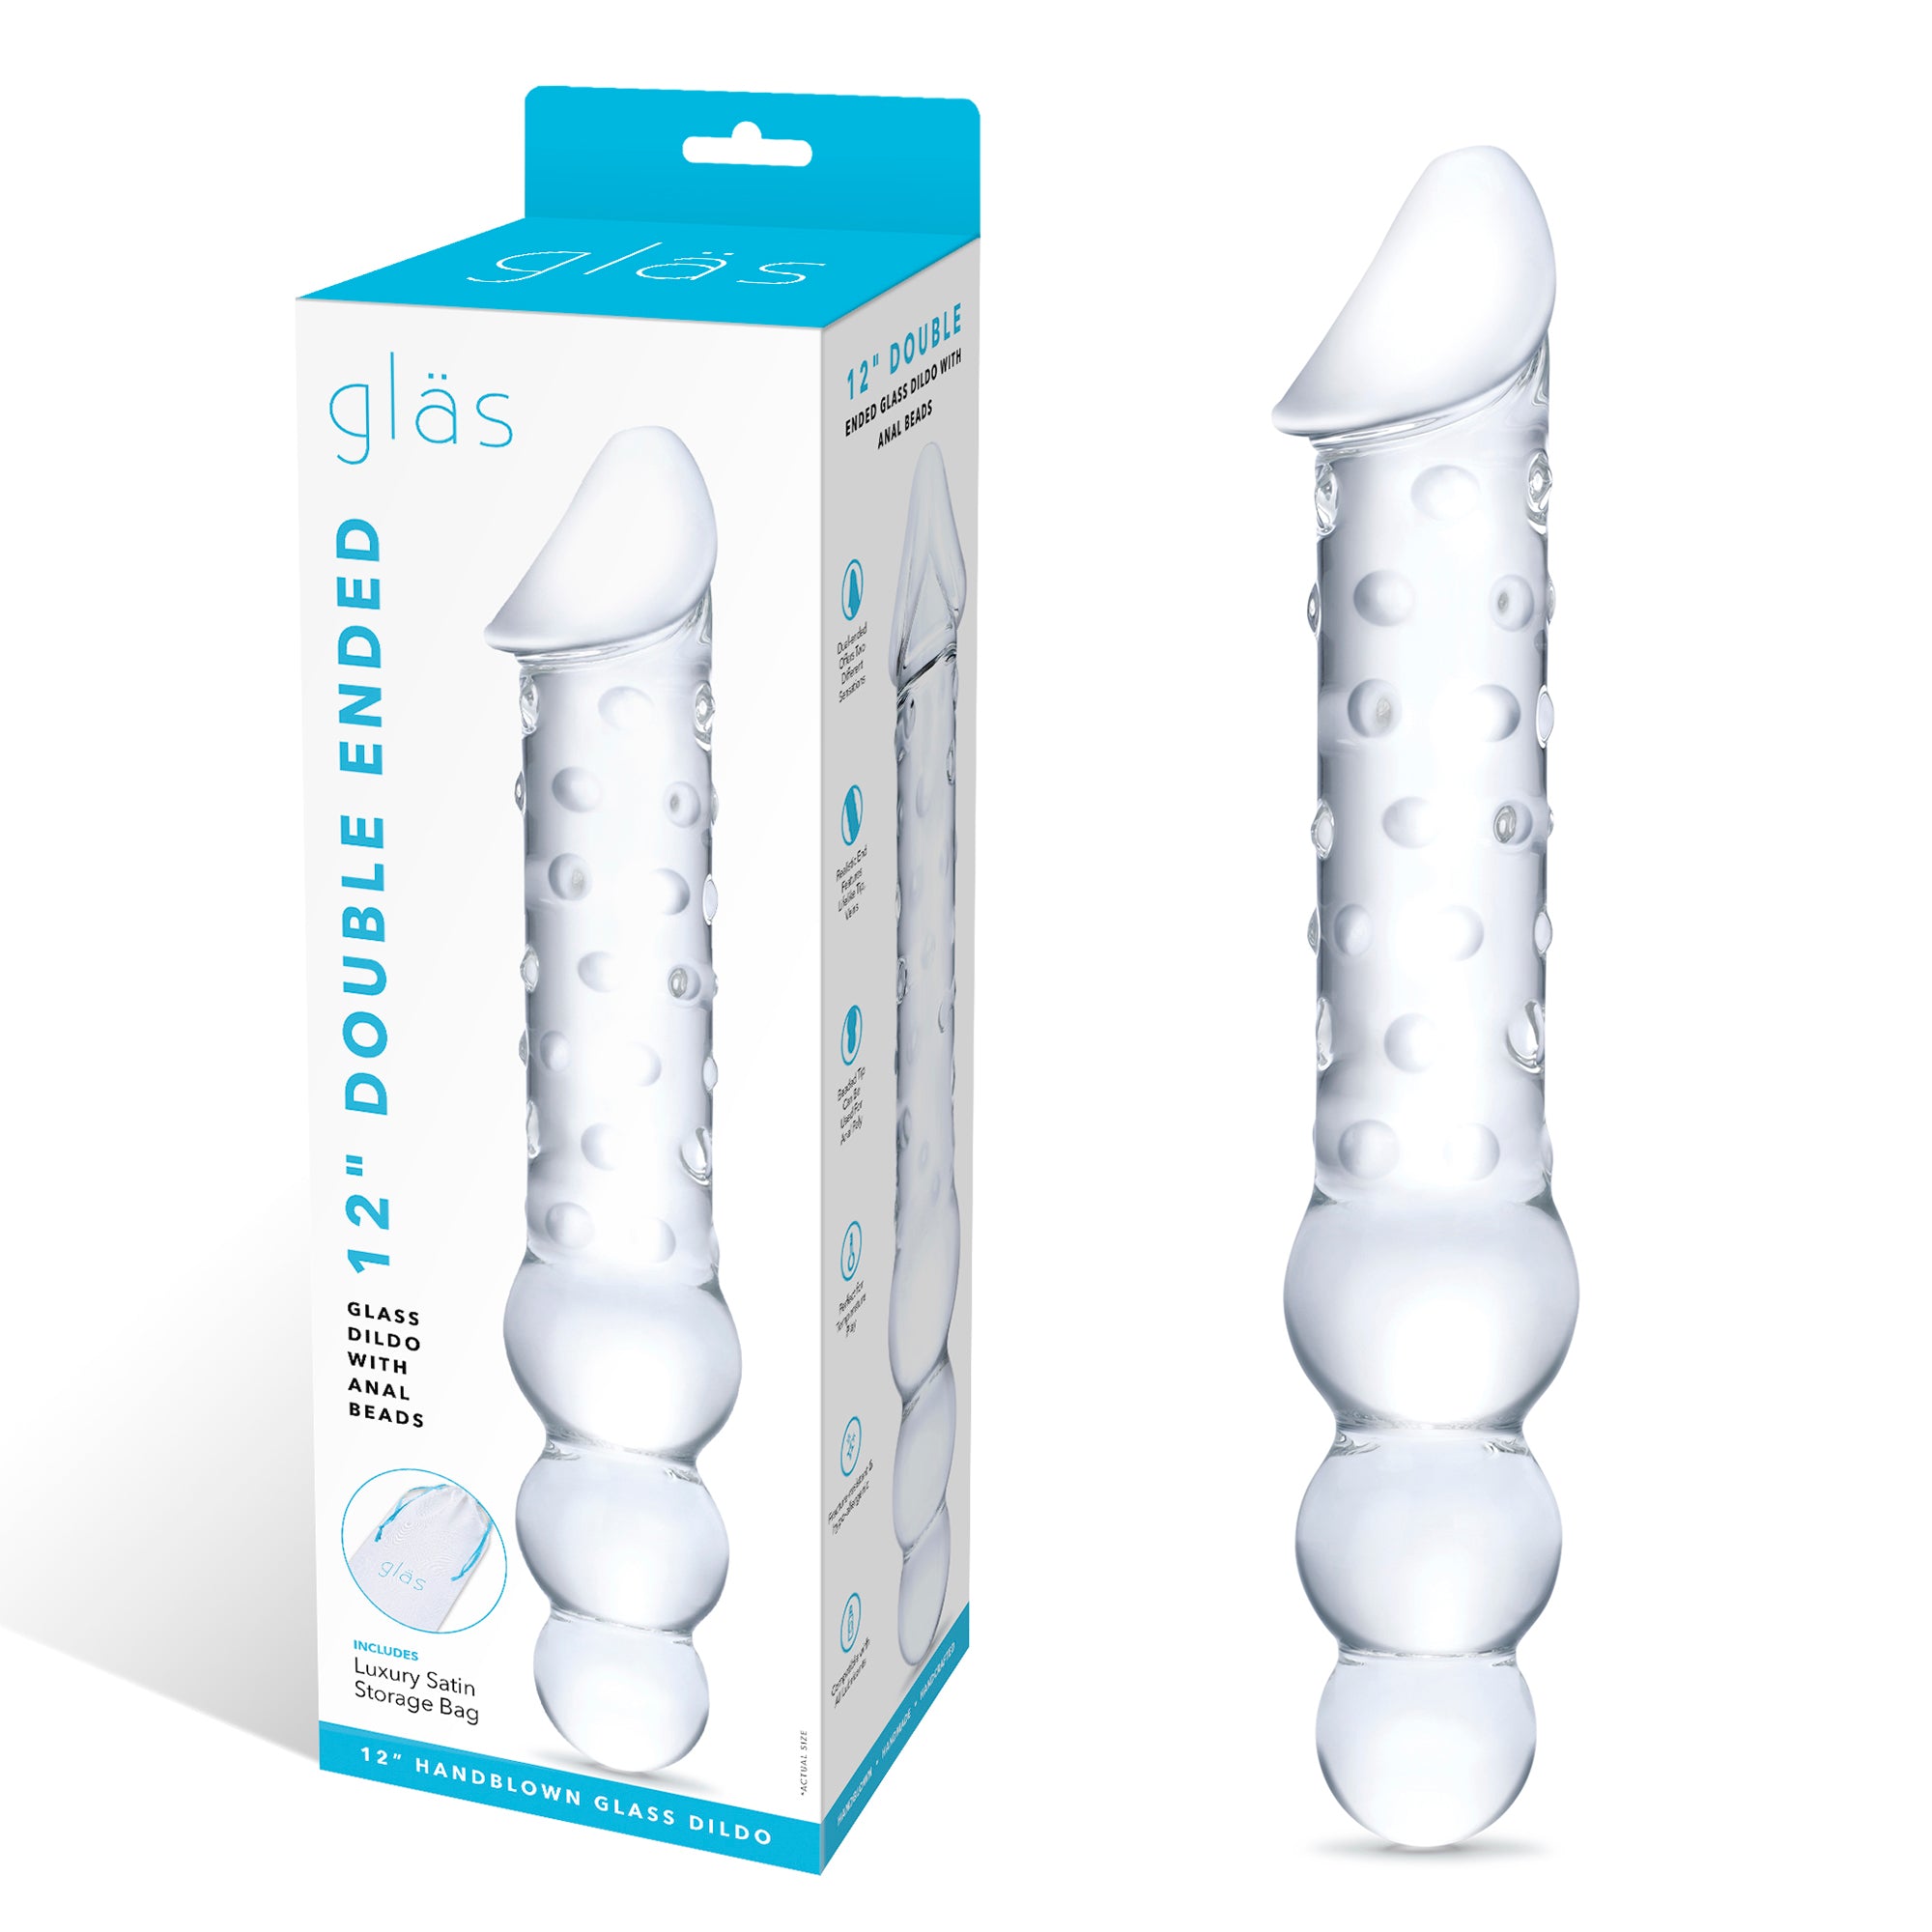 12" Double Ended Glass Dildo with Anal Beads